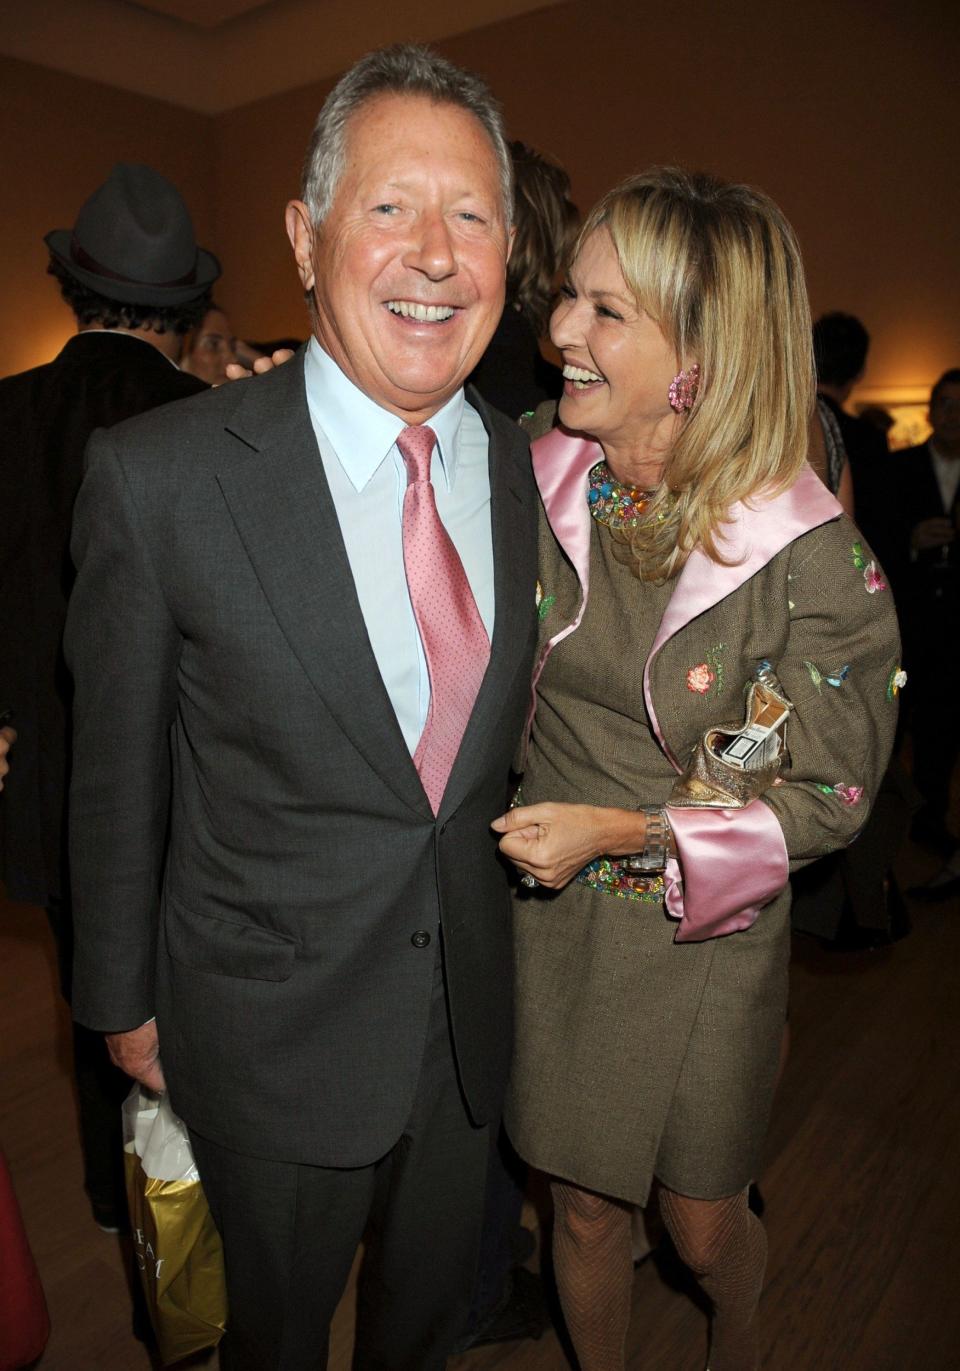 Richard Northcott with Mia Flick at a charity reception at Christies in 2009